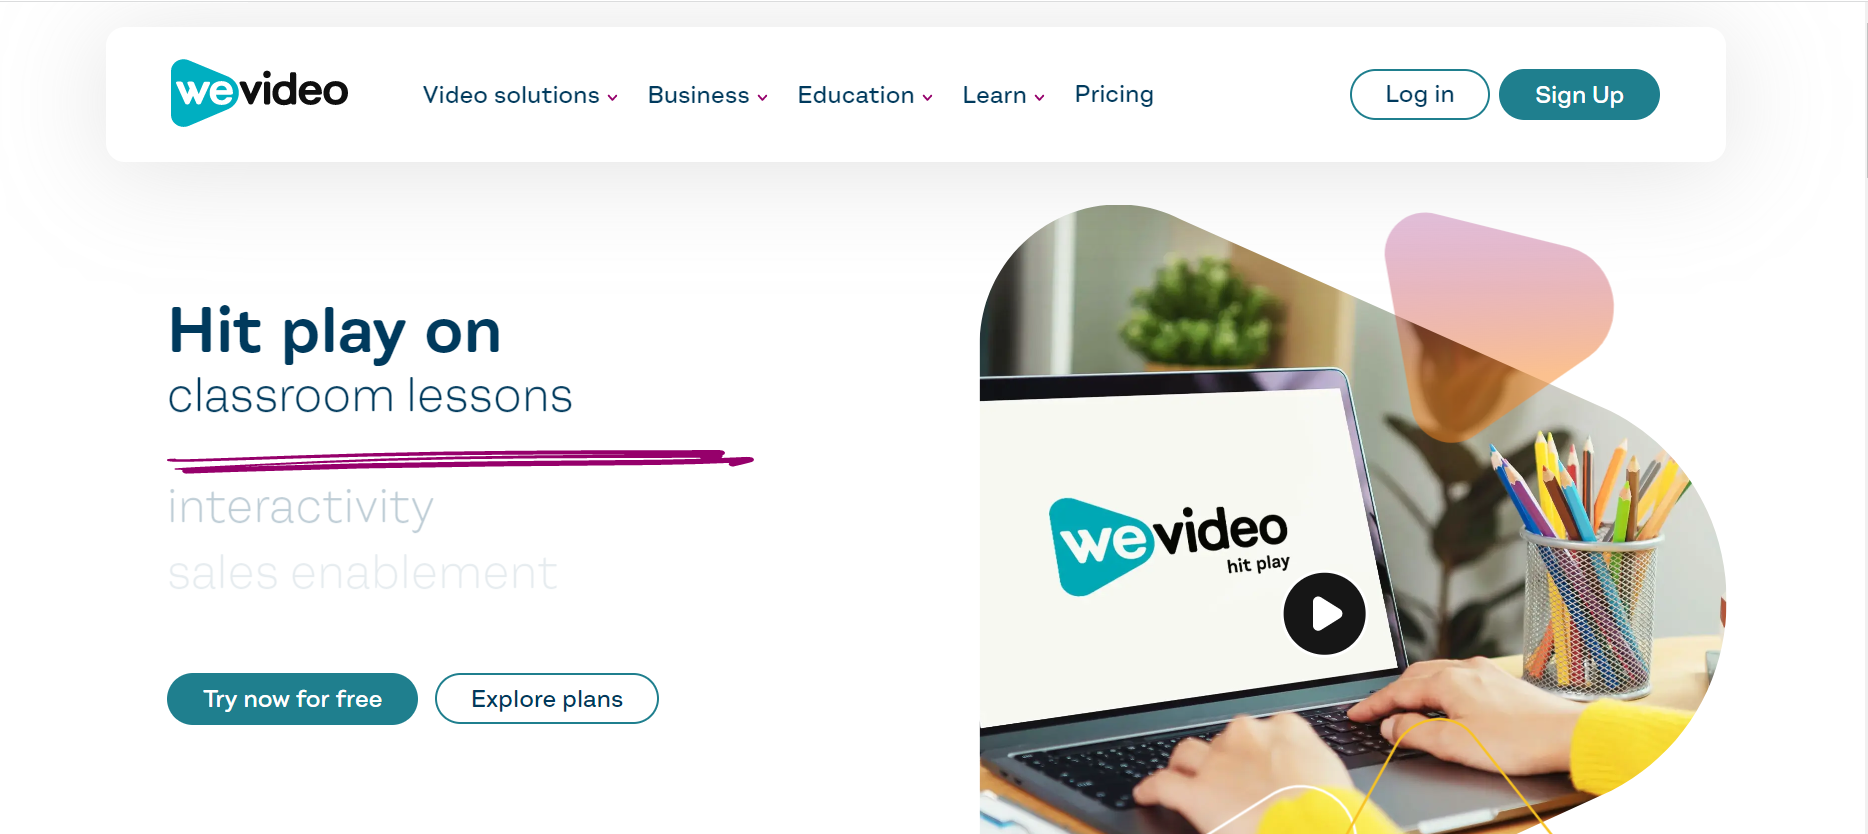 Video Marketing Tools for Business in 2023